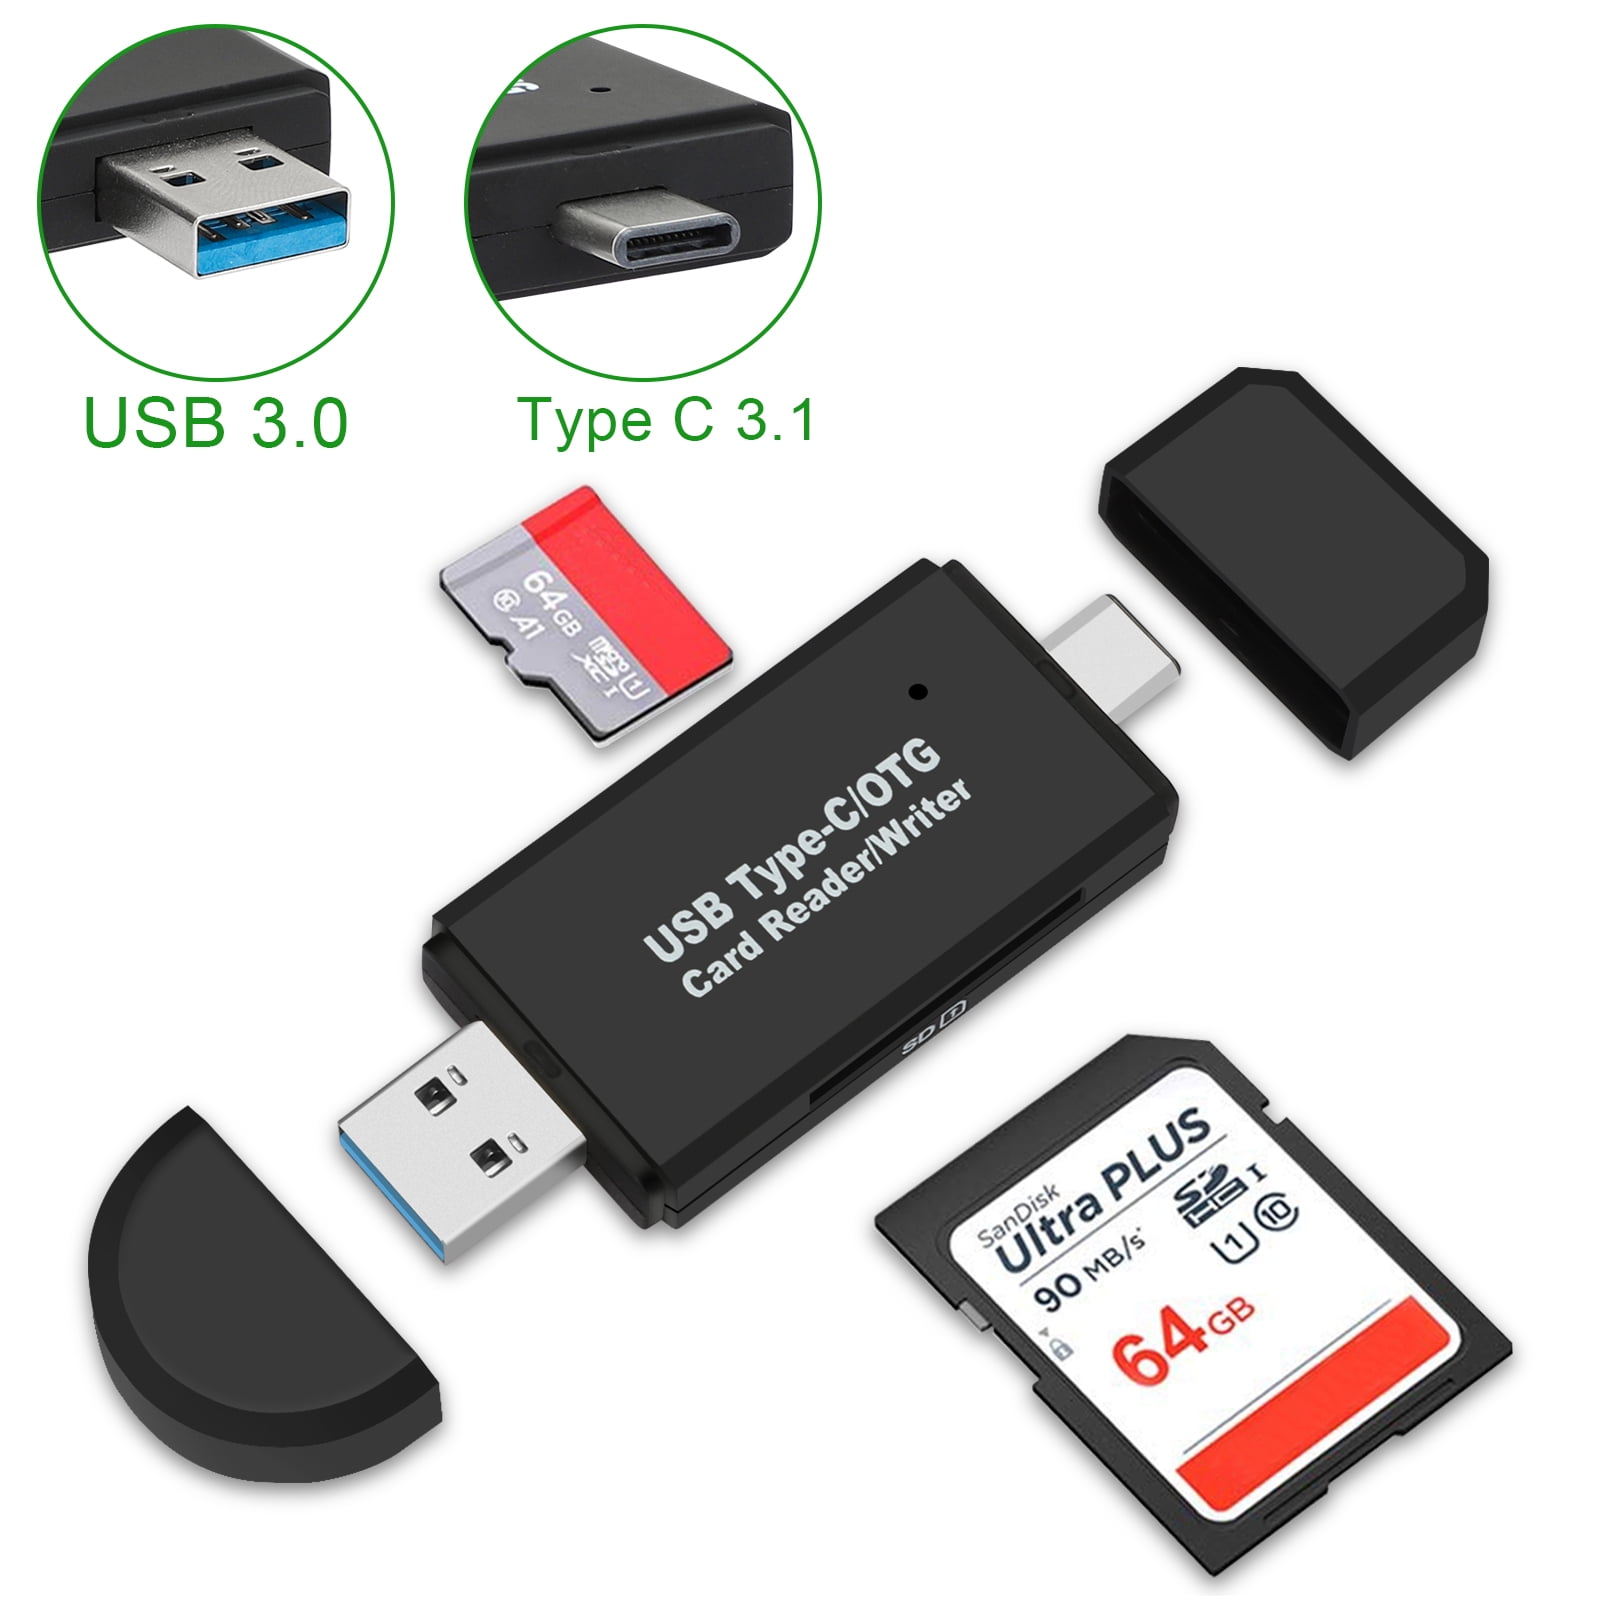 MMC Micro SDHC Card and UHS-I Card Micro SD USB 2.0 Portable Memory Card Reader Become Micro USB OTG Adapter for SDXC SD Micro SDXC RS-MMC SDHC 